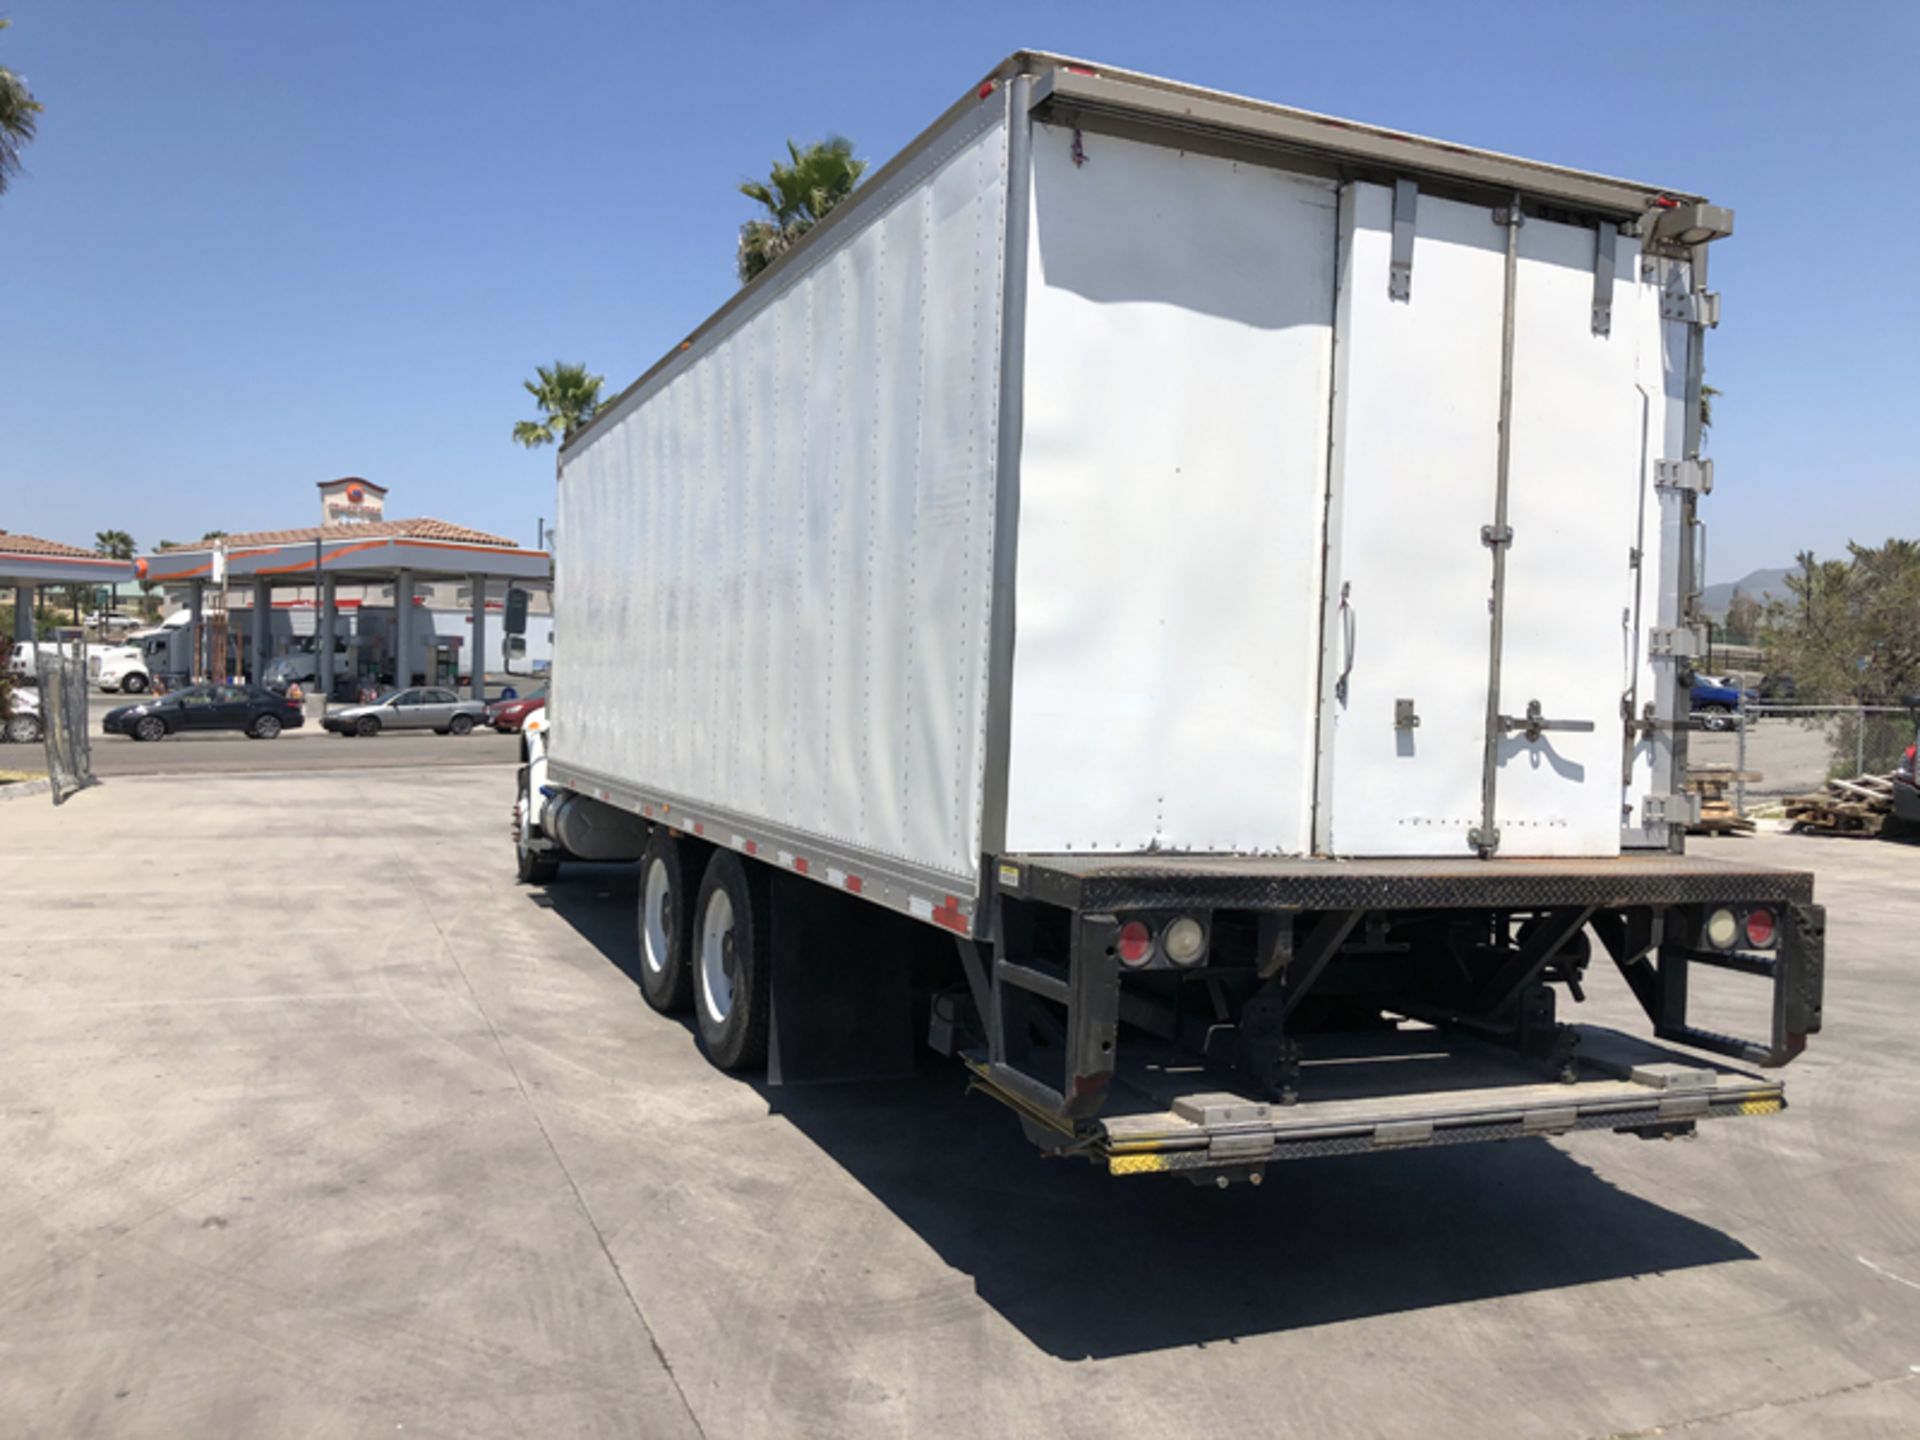 2018 INTERNATIONAL 4400 SBA 6X4 REFRIGERATED BOX TRUCK VIN#: 1HTMSTAR9JH528880, Approx Miles: 85689, - Image 6 of 10